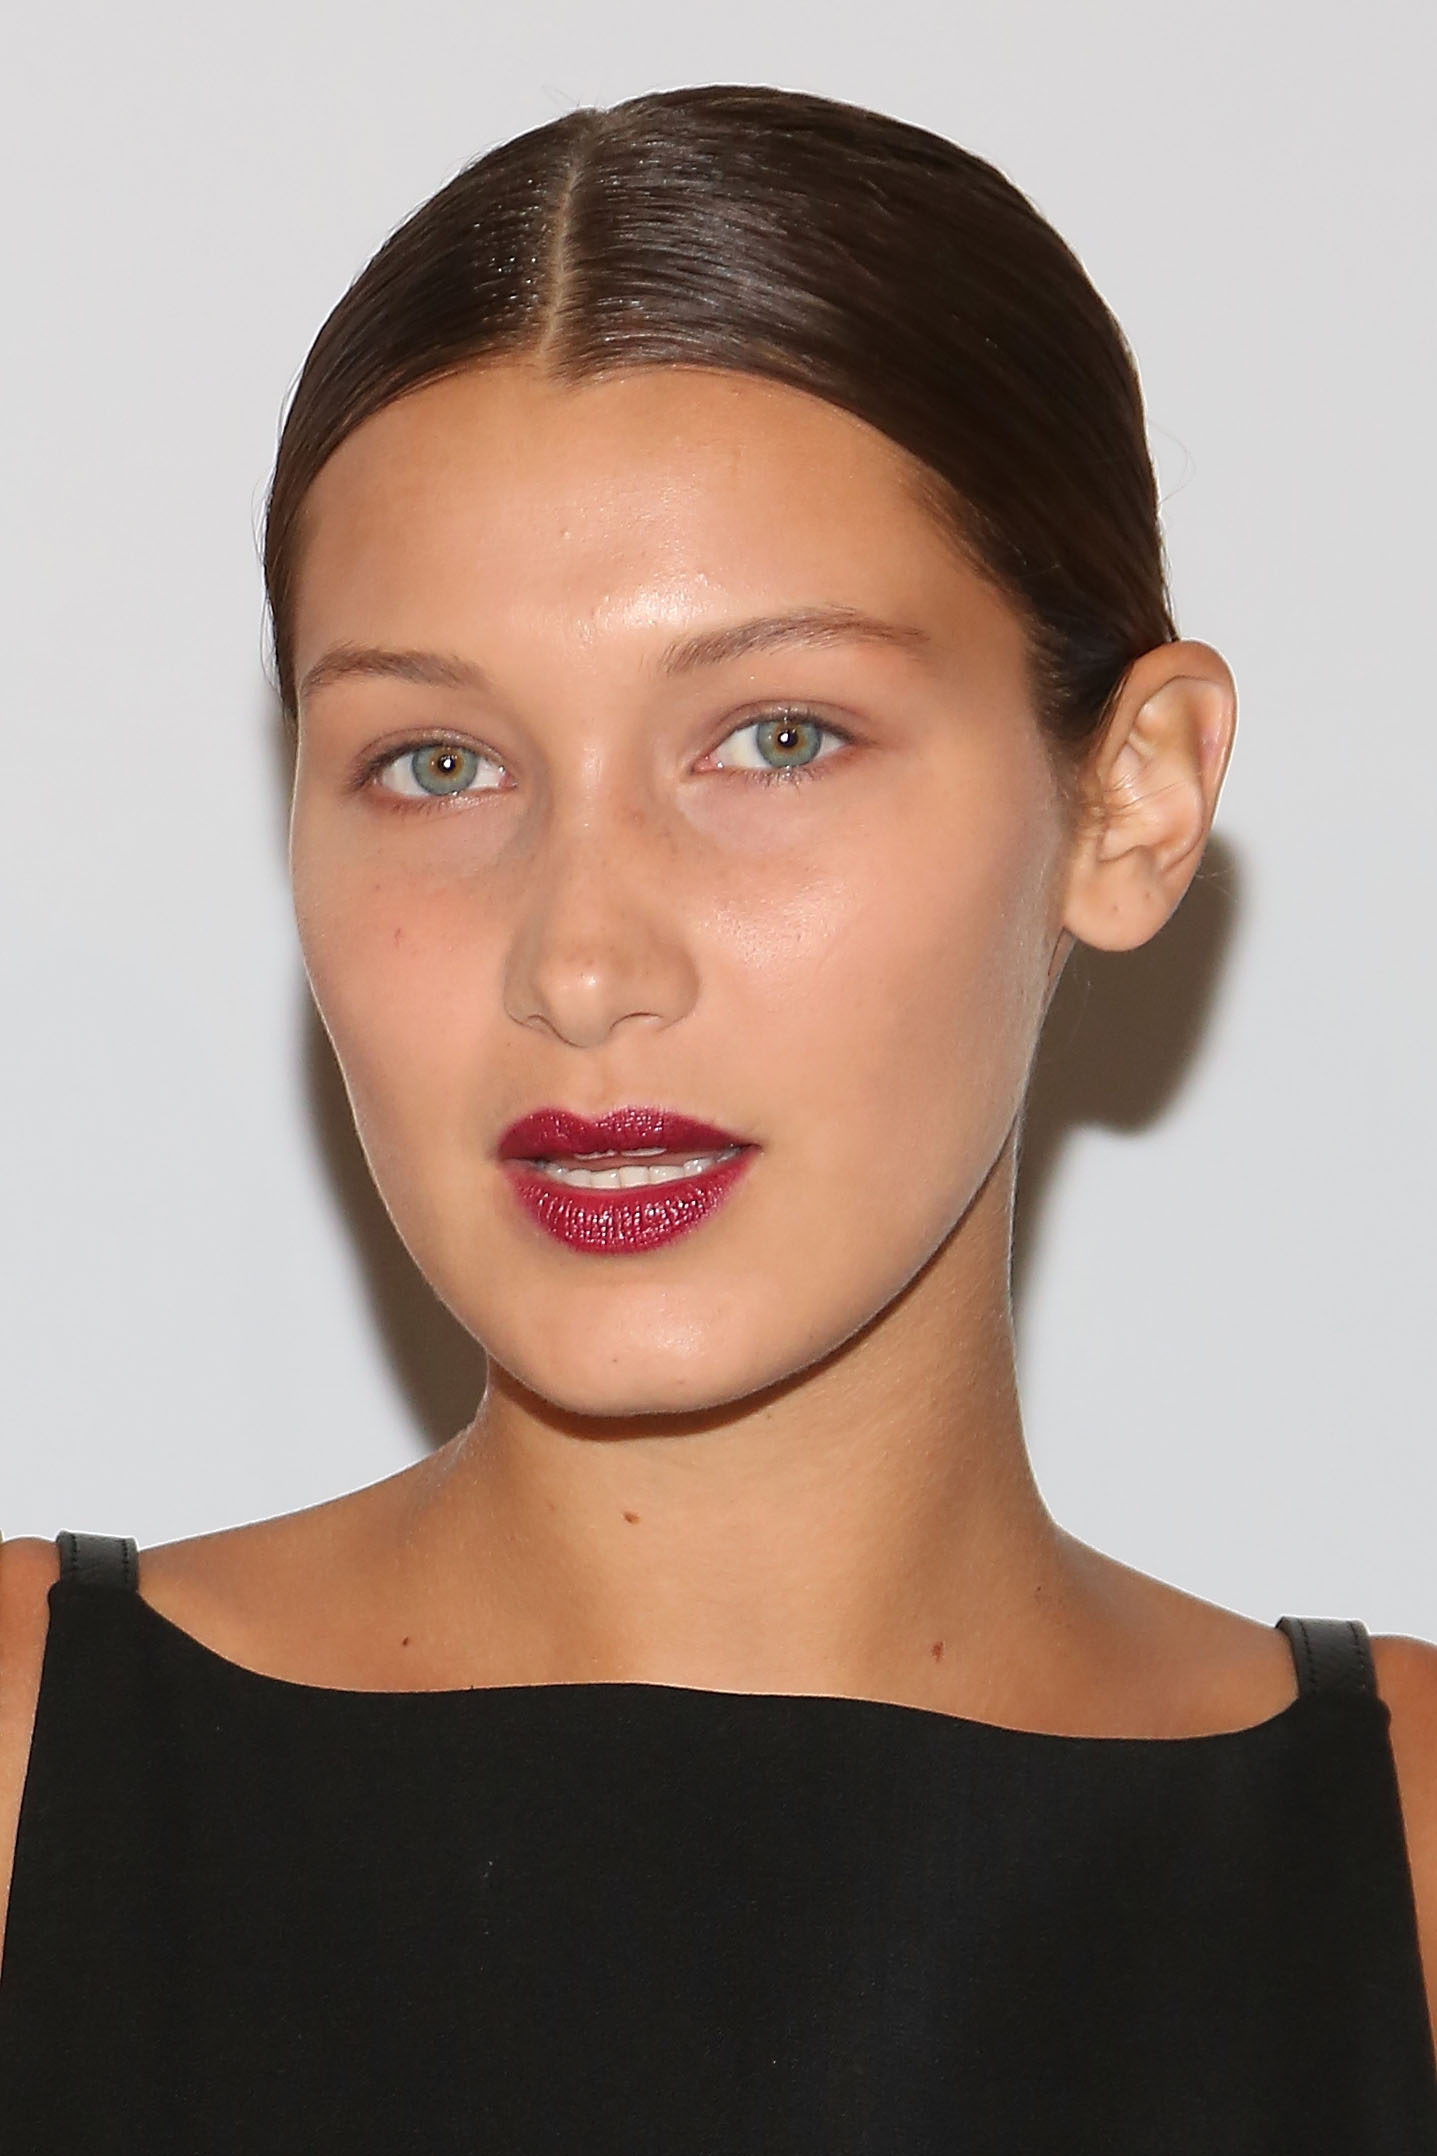 Bella Hadid besucht die Reveal Calvin Klein Fragrance Launch Party am 8. September 2014 in New York City. | Quelle: Getty Images